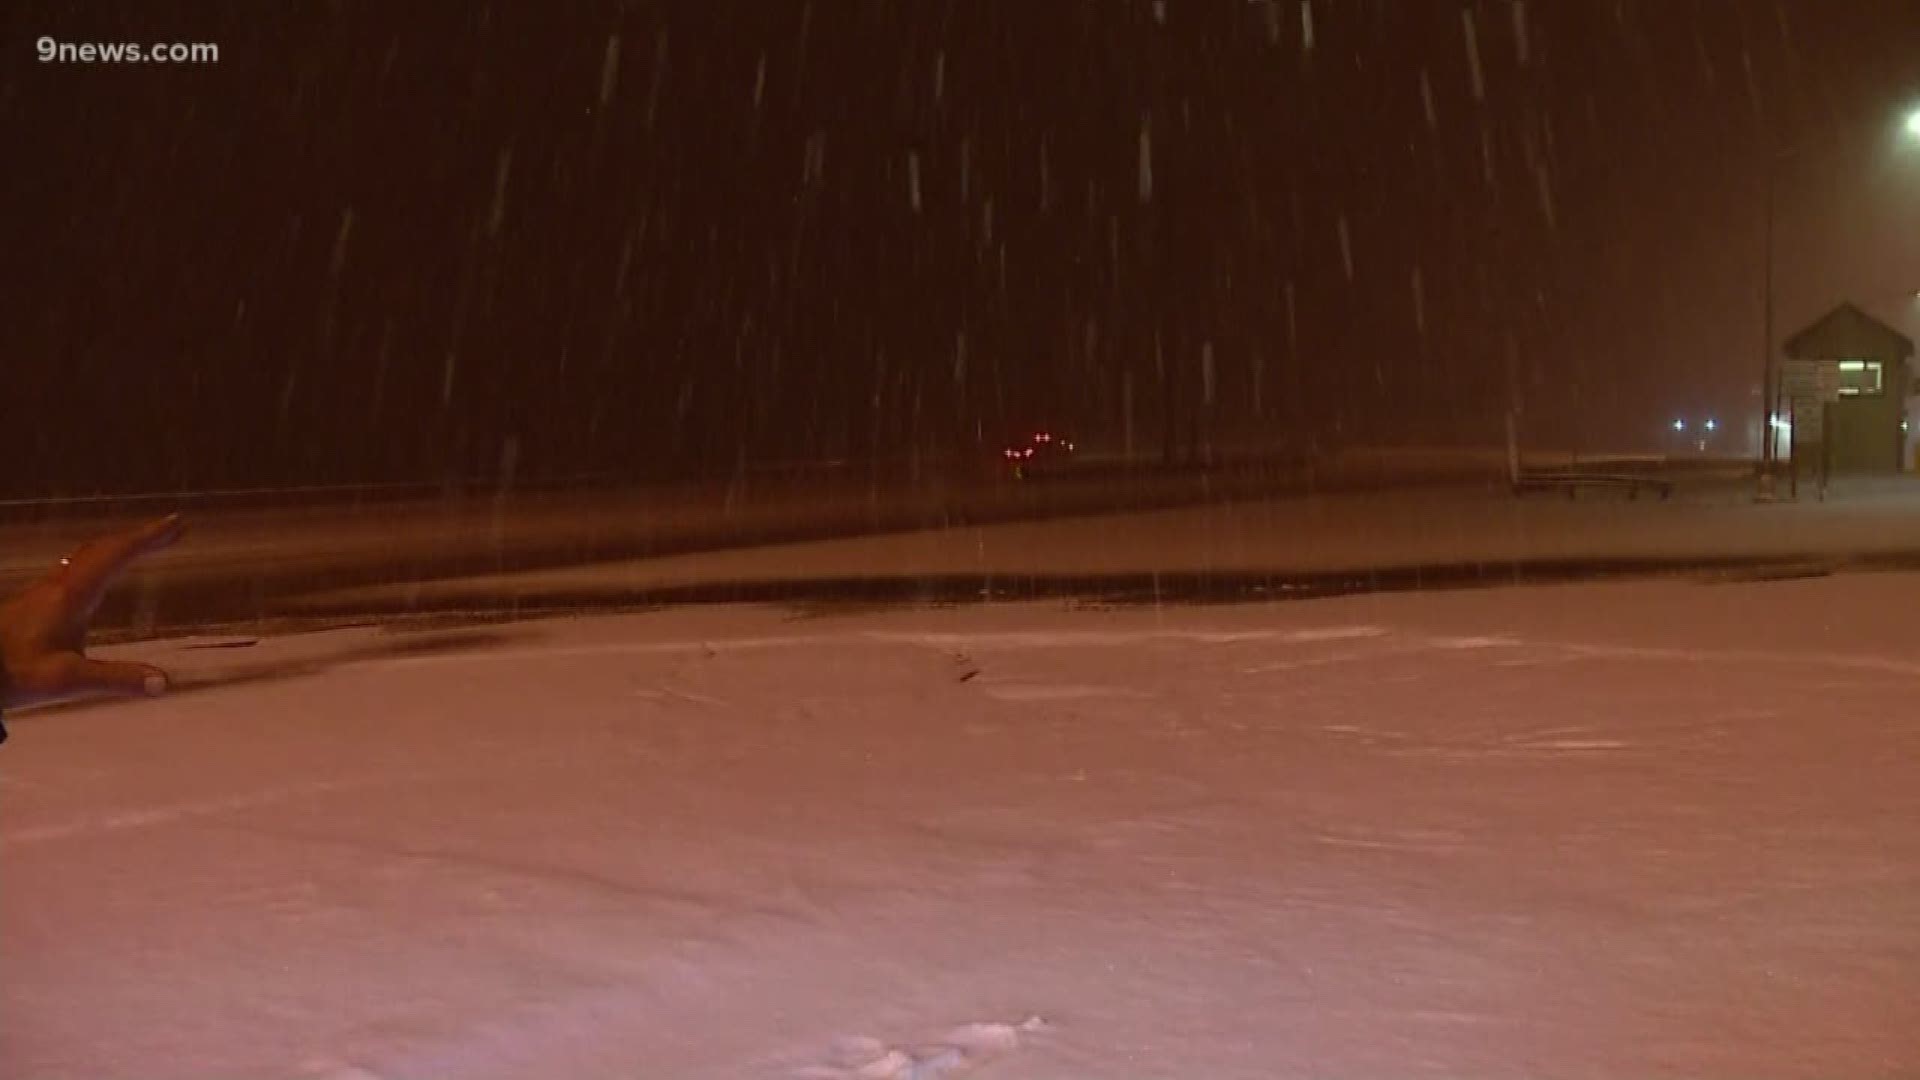 Heavy snow started to fall in the mountains on Thursday morning. Matt Renoux has a look at conditions near the Eisenhower Tunnel.